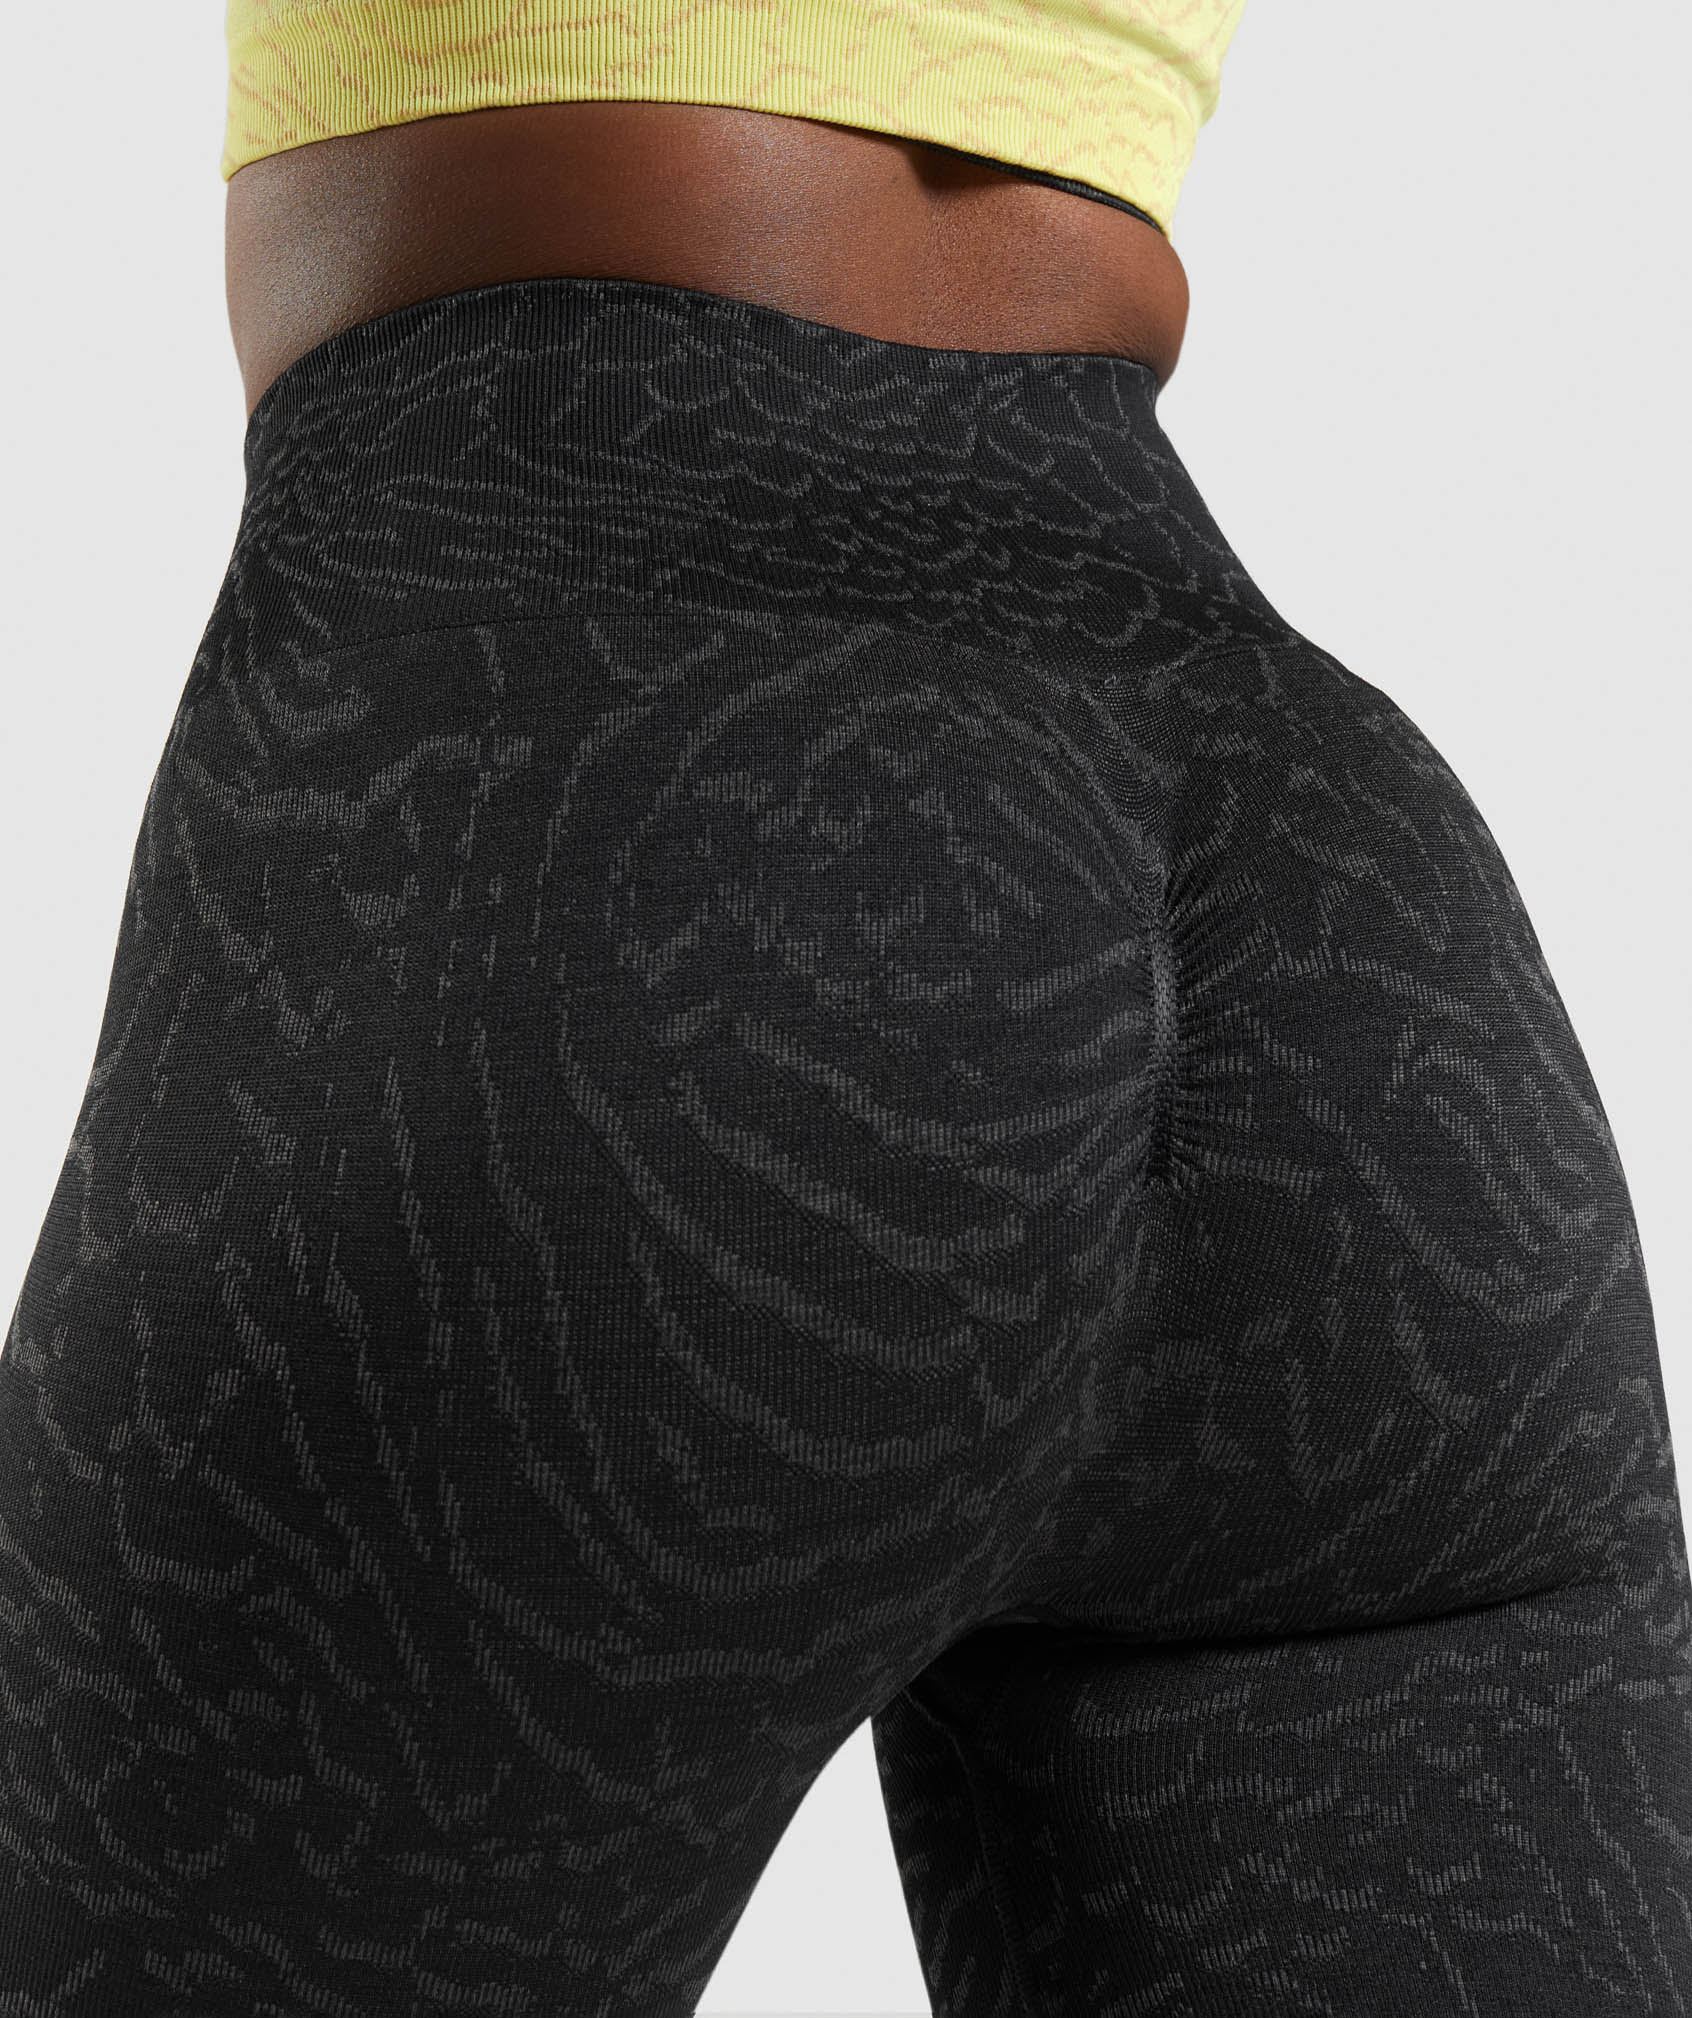 Gymshark Adapt Animal Seamless Cycling Shorts - Butterfly